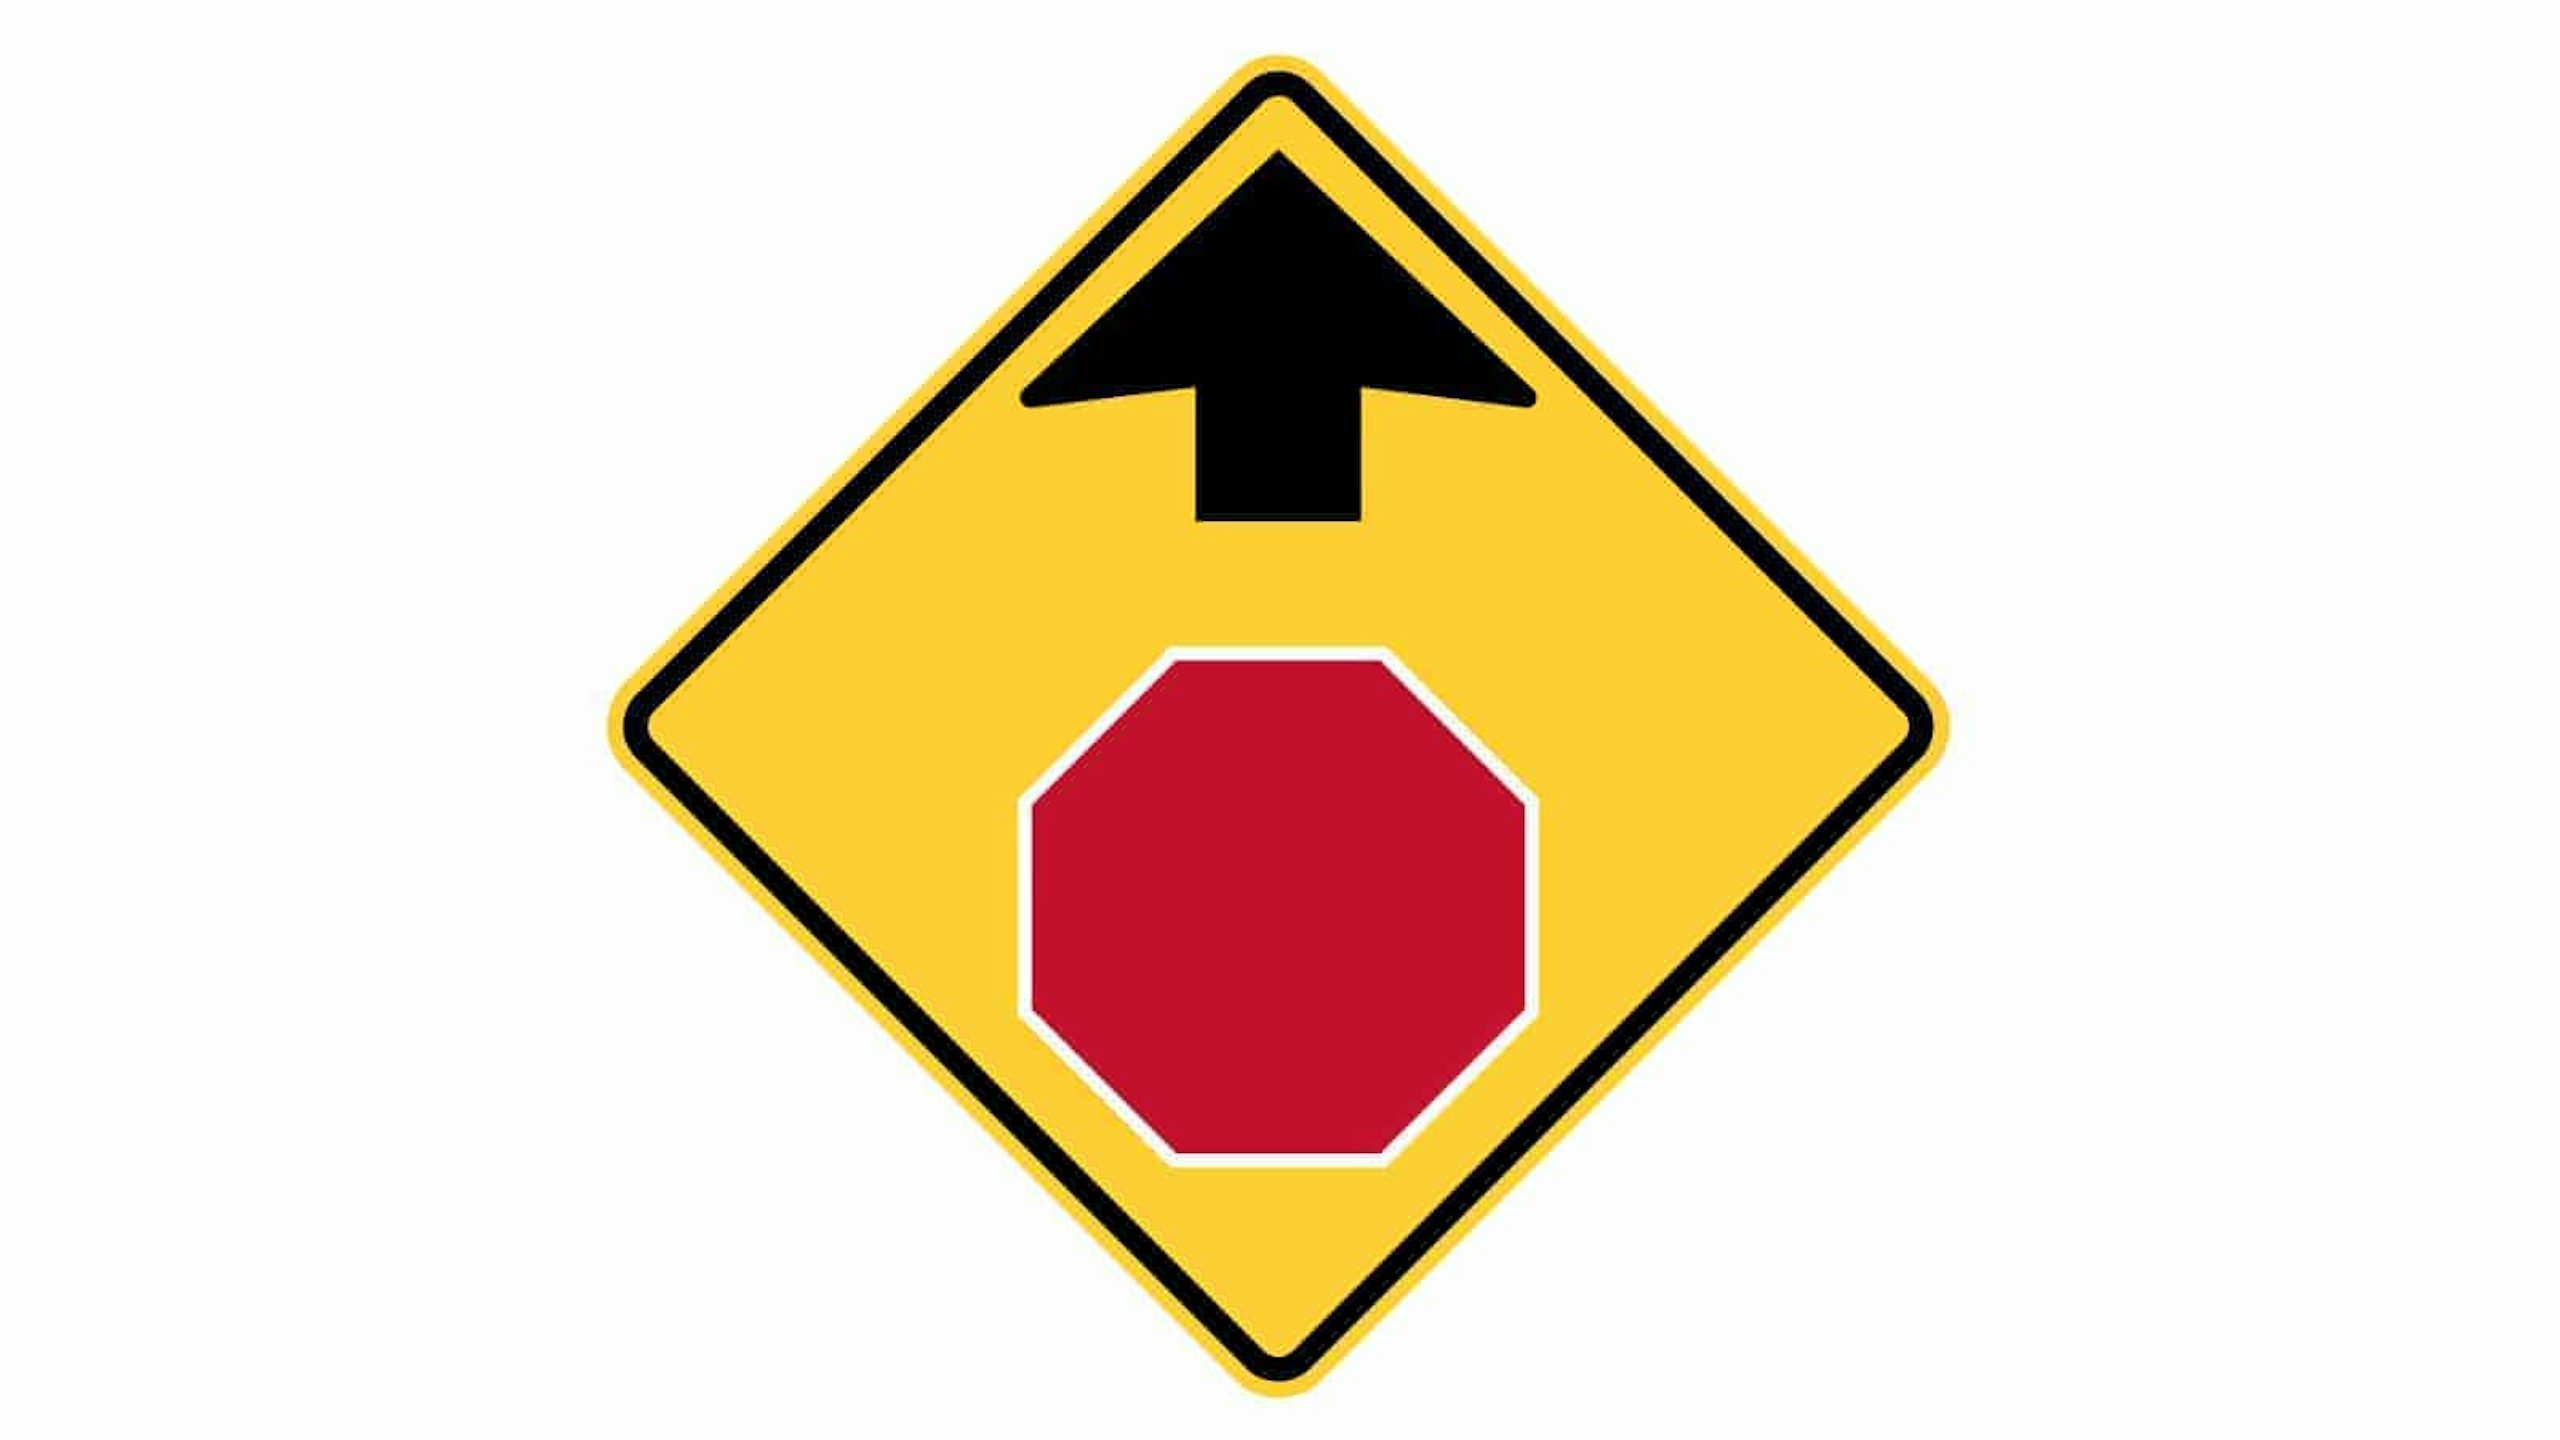 Warning sign STOP sign ahead